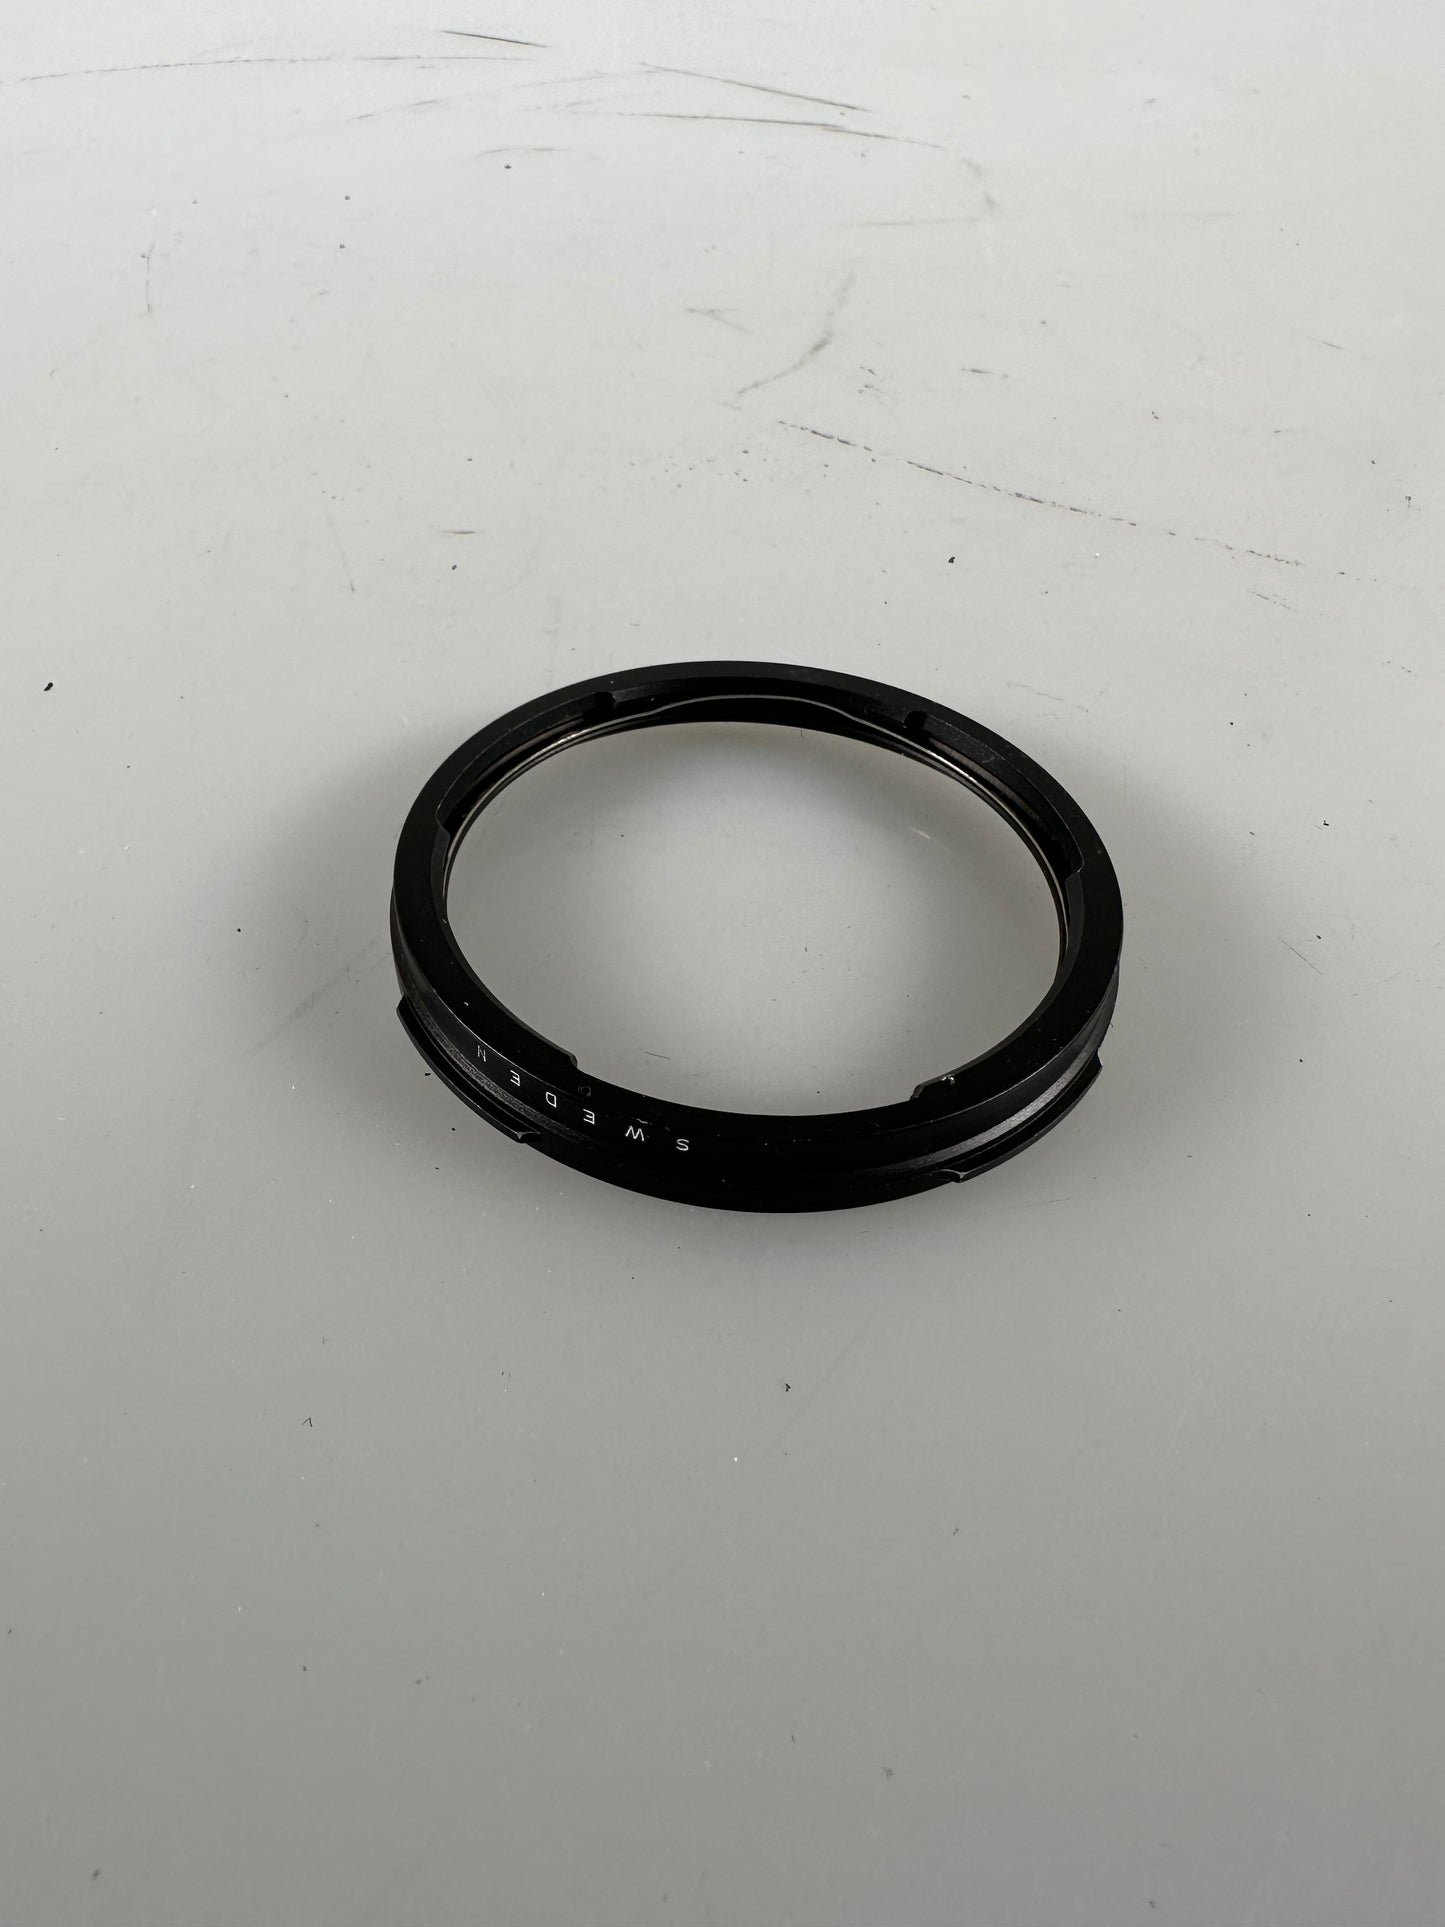 Hasselblad Bay 50 to 60 (B50 to B60) Step-Up Ring